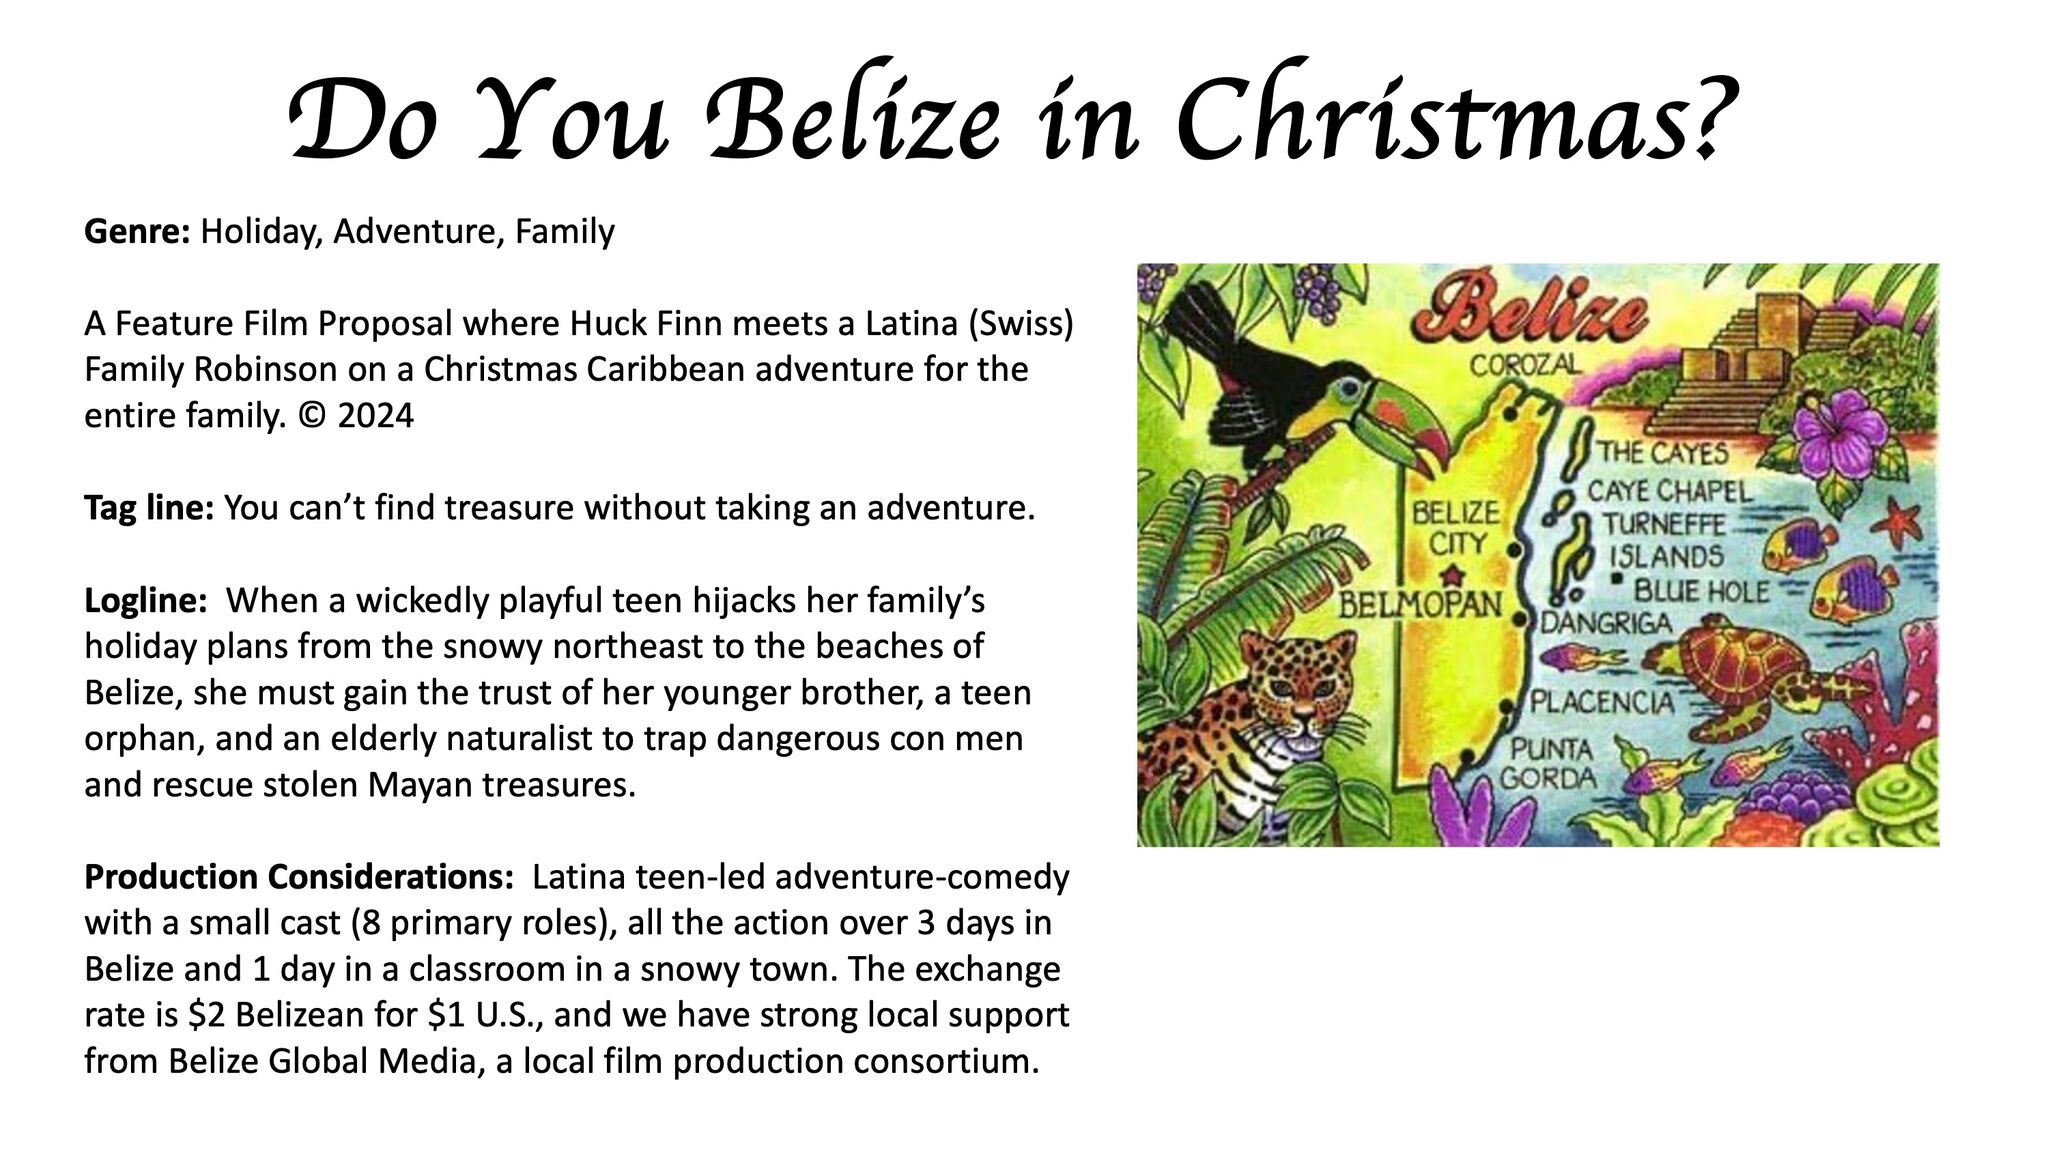 DO YOU BELIZE IN CHRISTMAS?